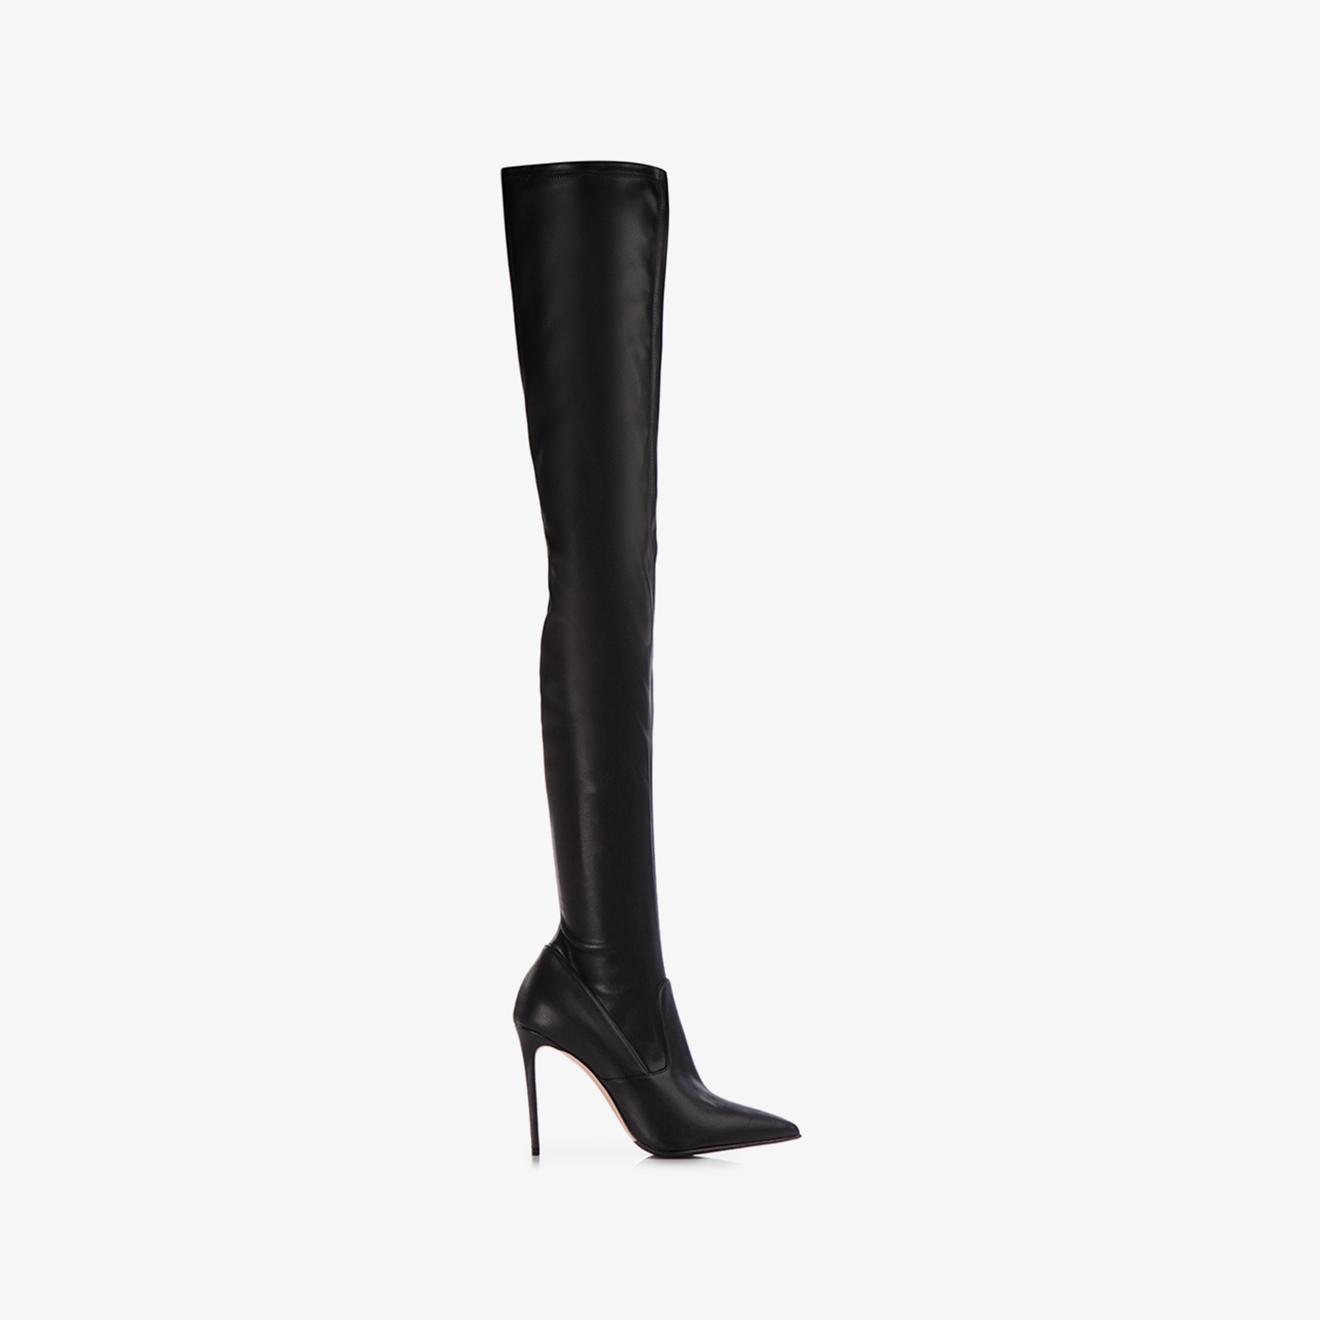 Black stretch vegan leather over-the-knee boot - Le Silla